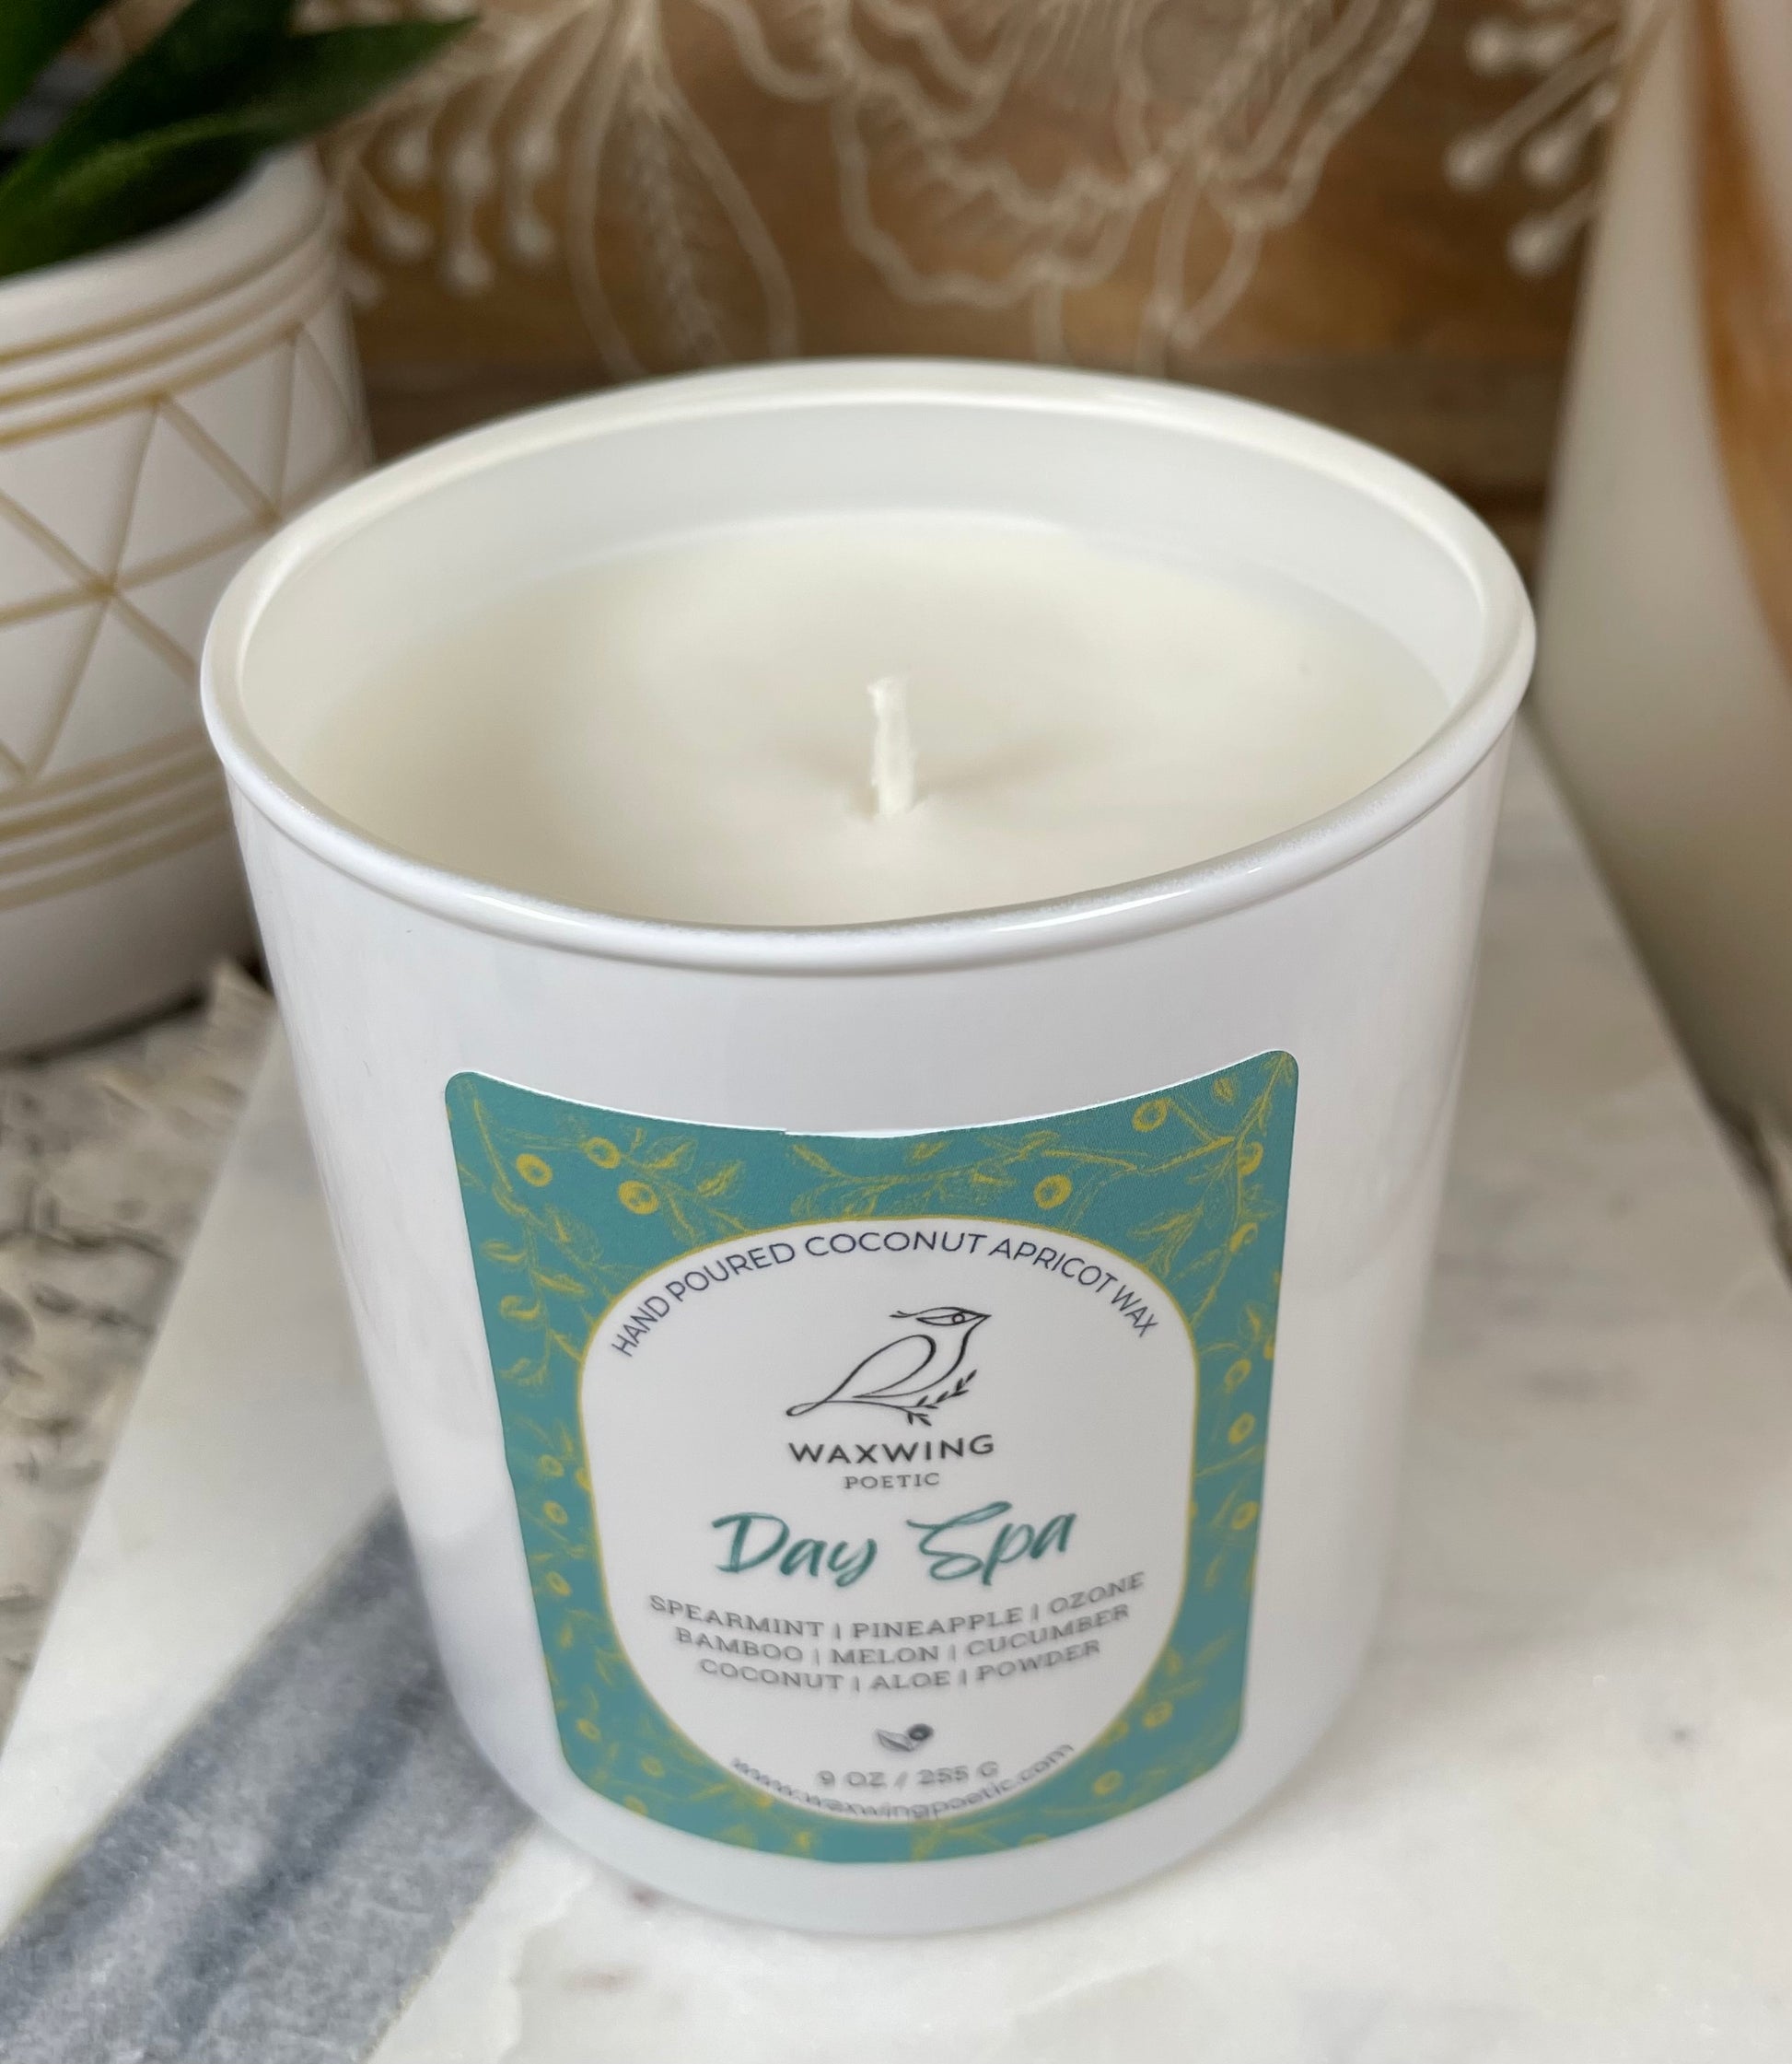 Lavender Spa Soy Coconut Wax Candle - Divinely Candles